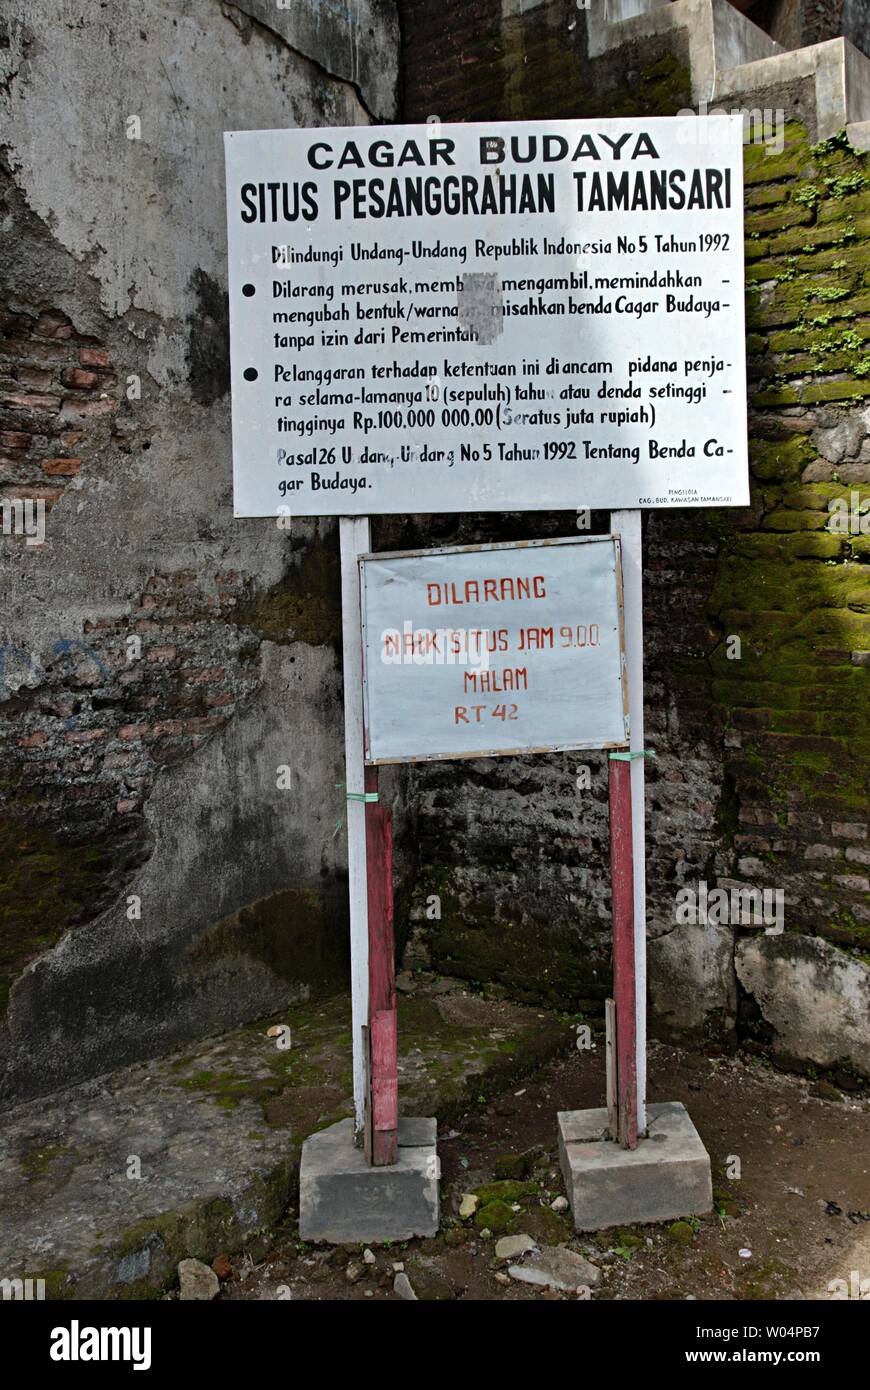 Sign boards in Taman Sari. Taman Sari Water Castle, also known as Taman Sari, is the site of a former royal garden of the Sultanate of Yogyakarta. Stock Photo